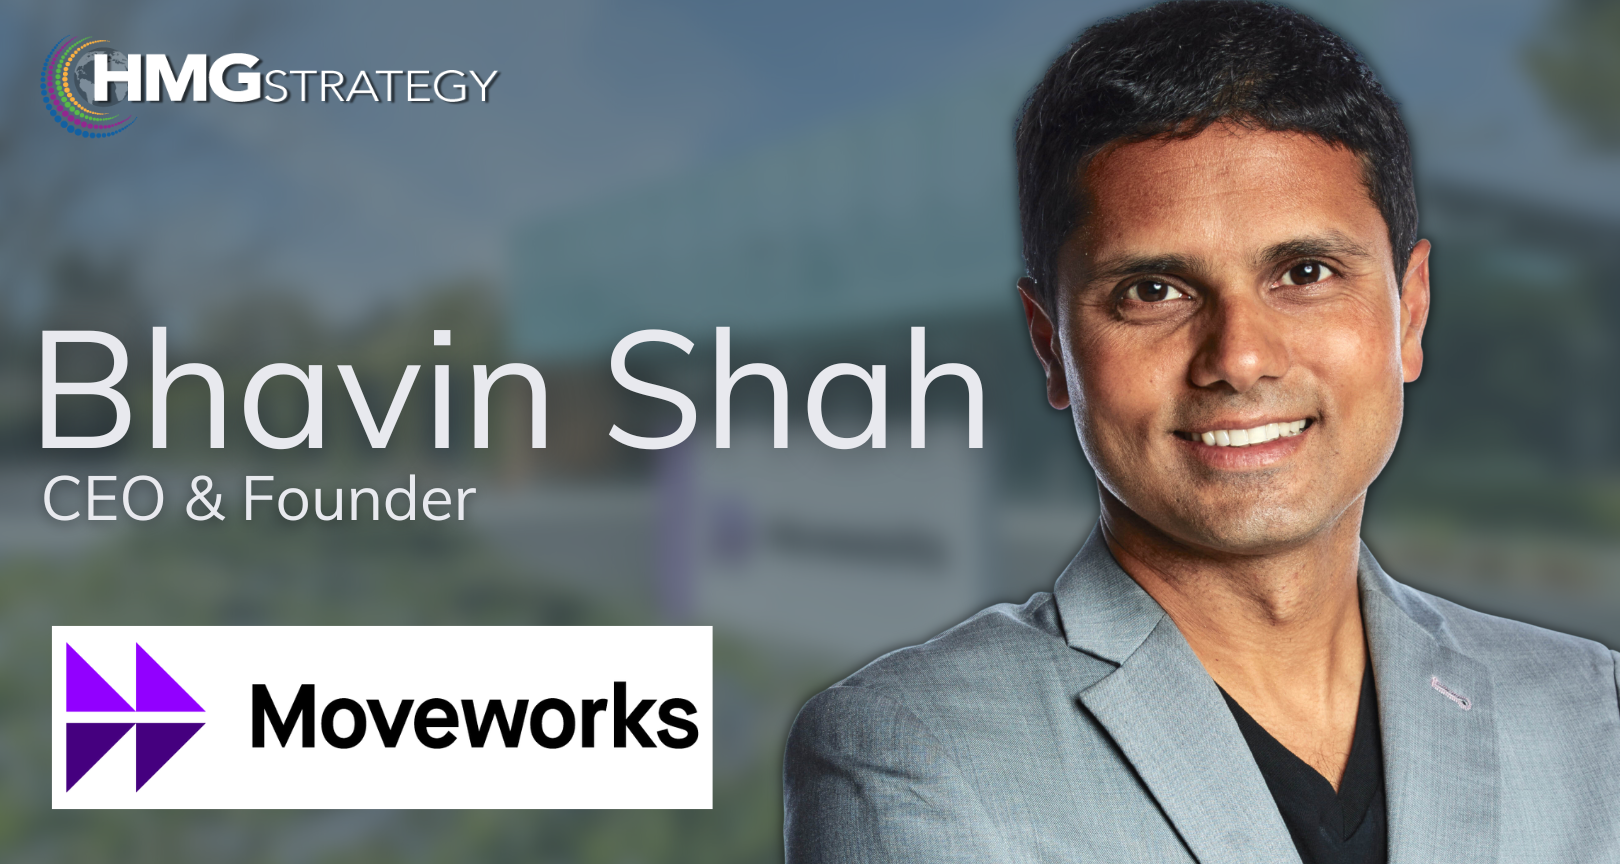 Visionary Leadership: The Enterprise’s iPhone Moment, interview with Bhavin Shah, CEO & Founder, of Moveworks